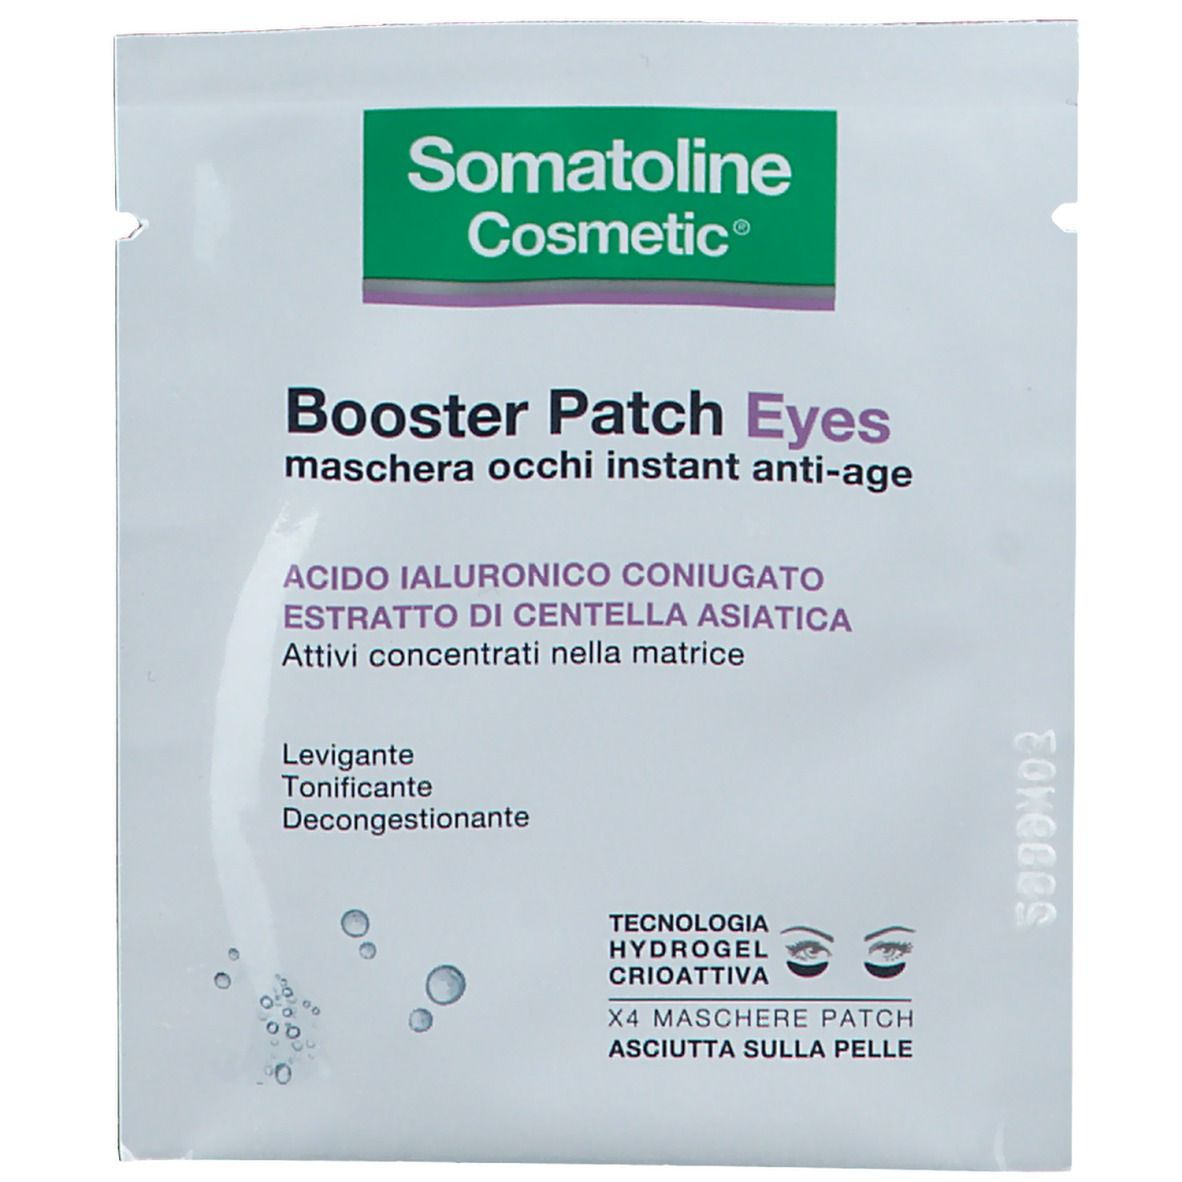 Somatoline Cosmetic® Booster Patch Eyes